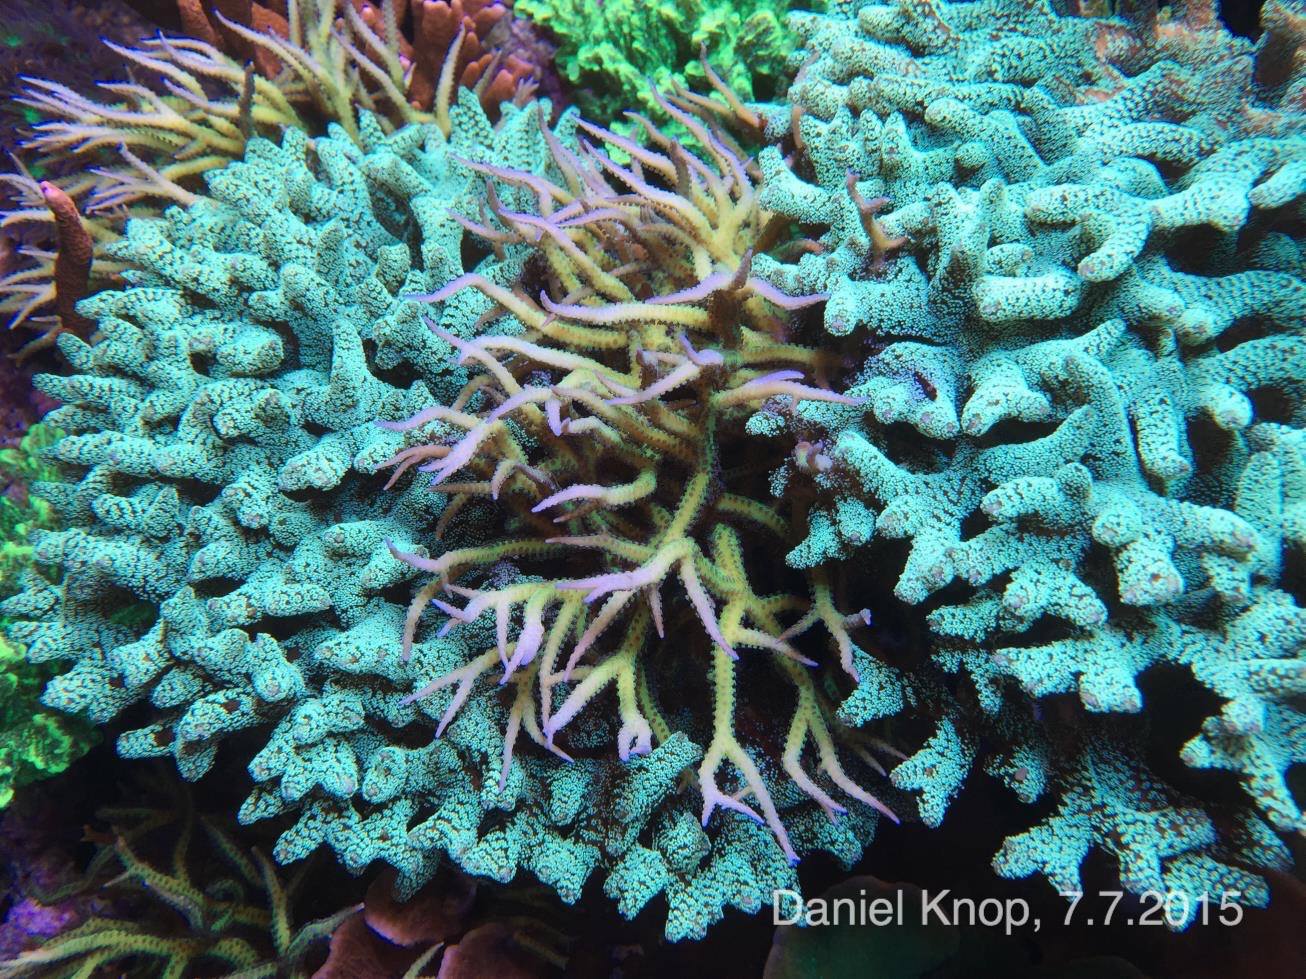 Using contrasting corals in close proximity creates visual interest and appeal - here a Ponape Birdsnest resides between two Green Birdsnest colonies.